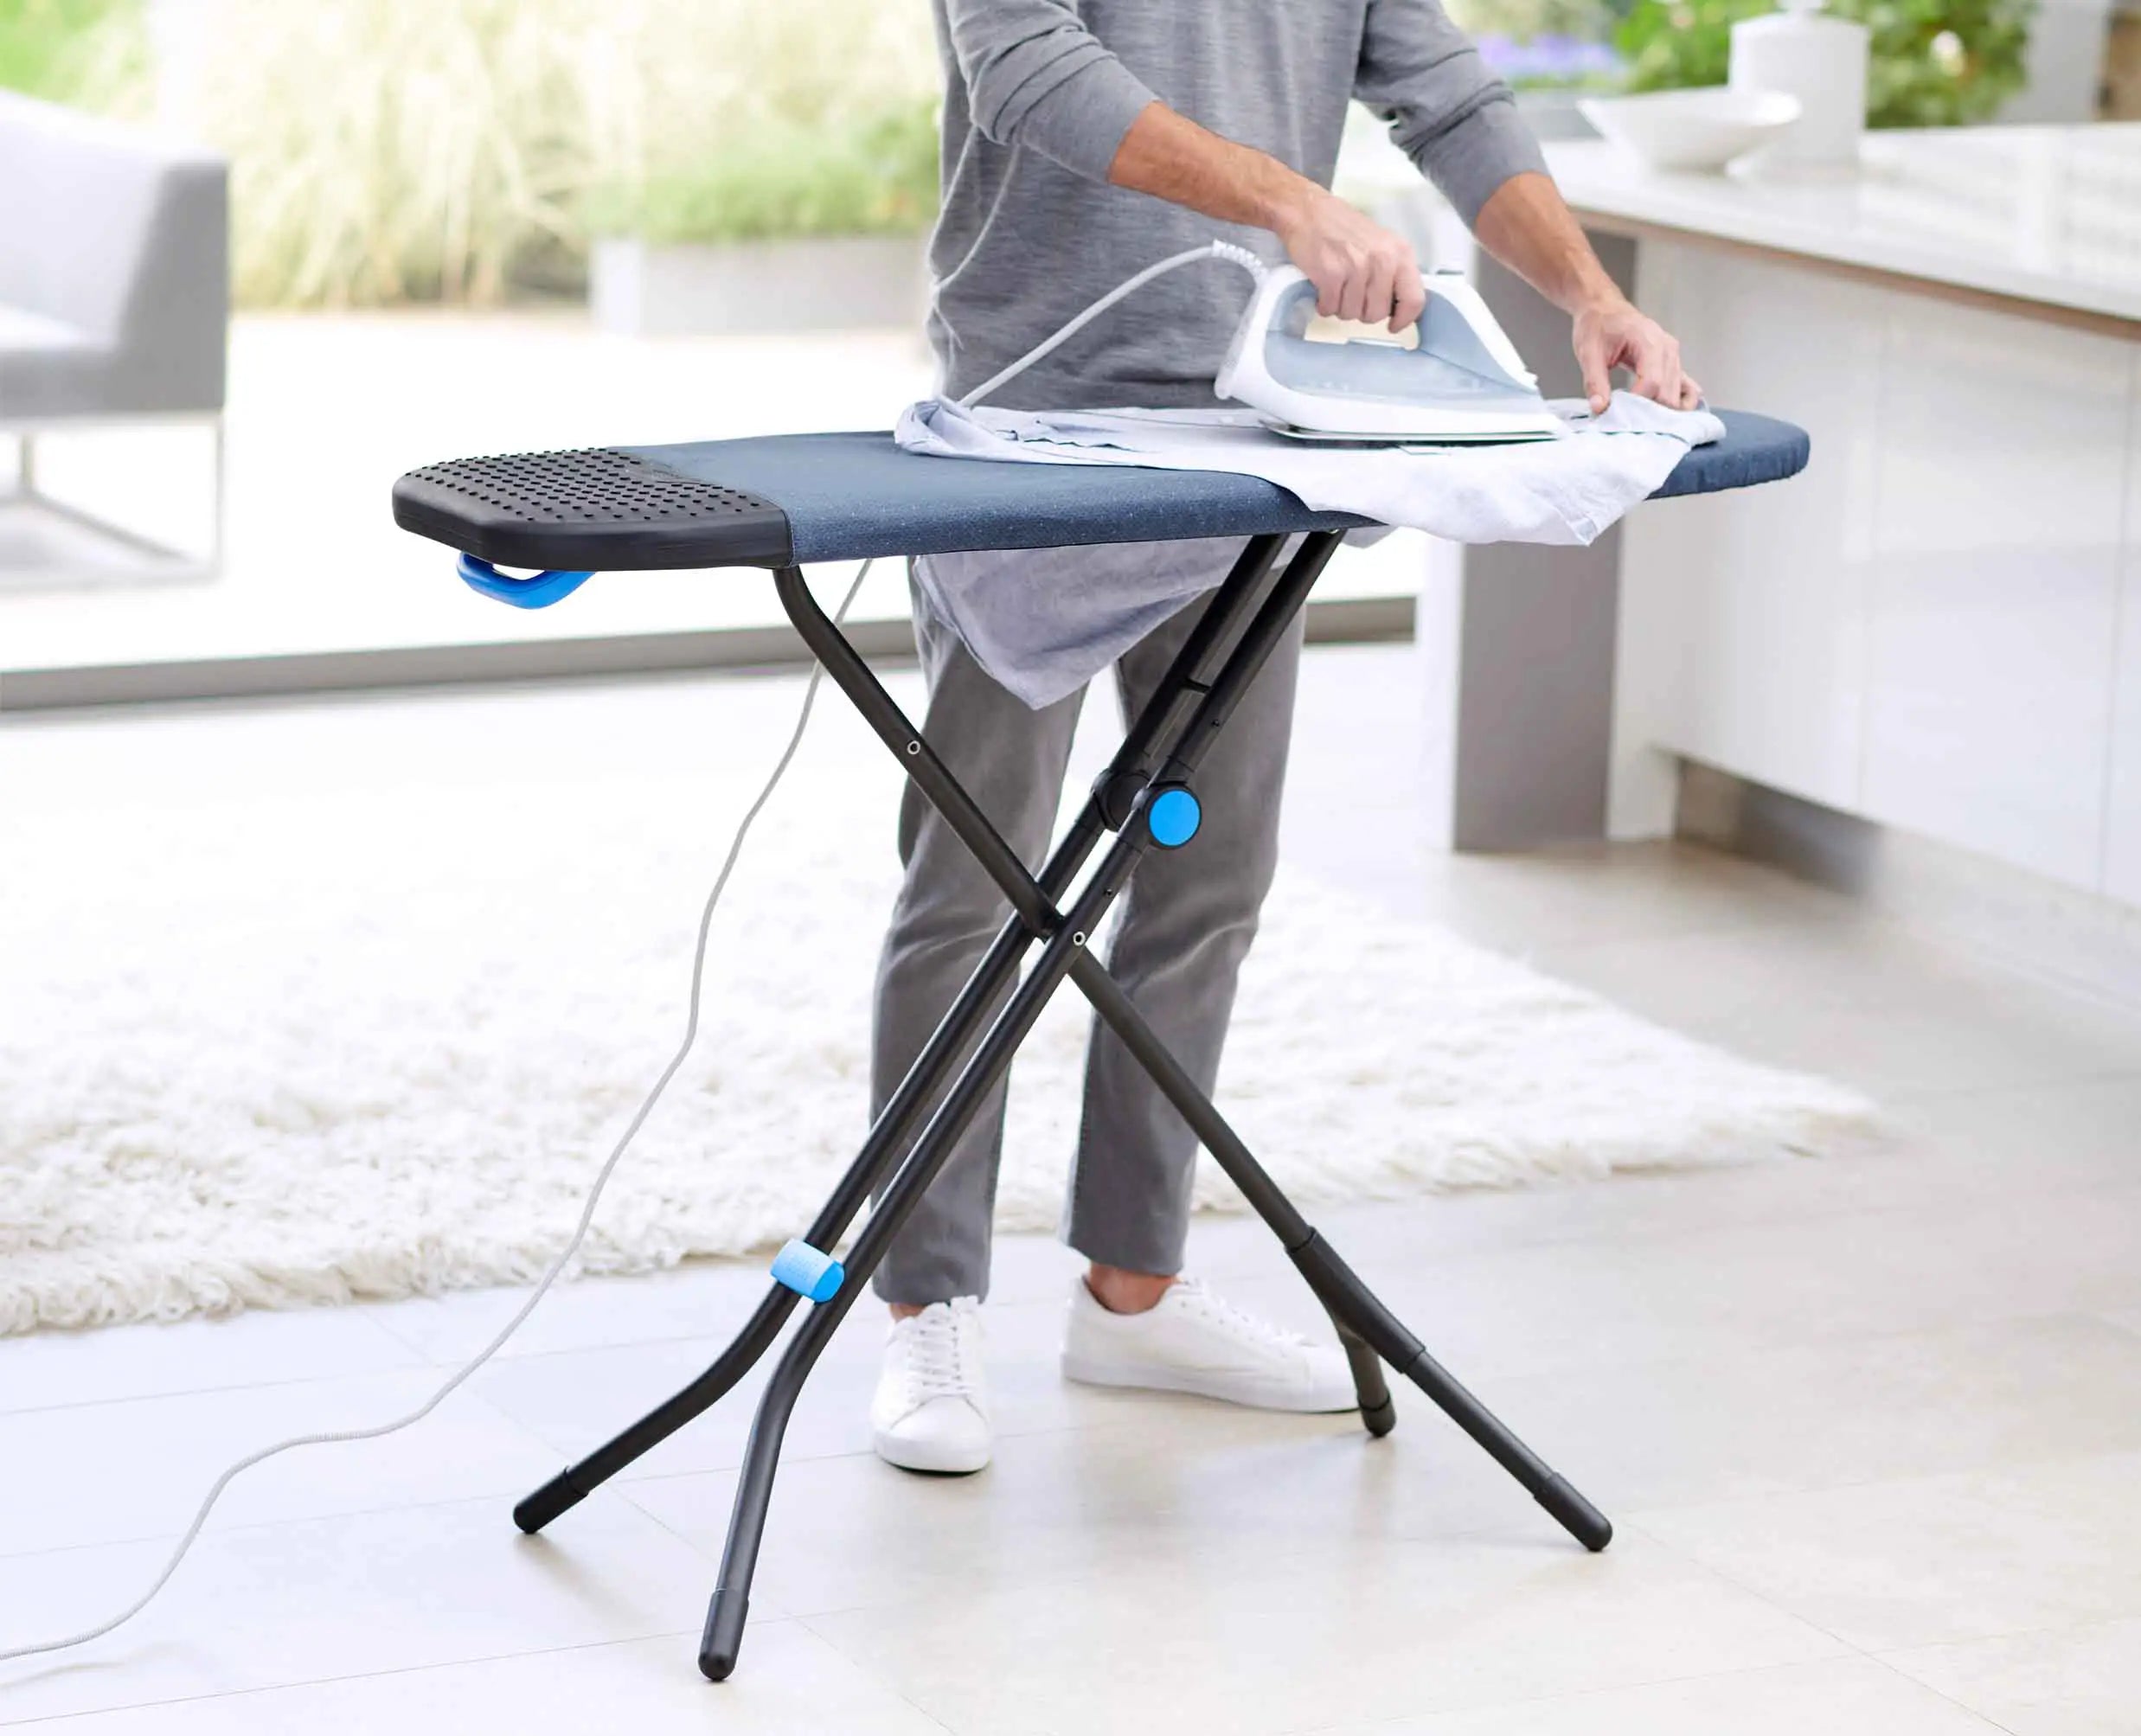 Glide Plus Easy-store Ironing Board with Advanced Cover - 50006 - Image 3